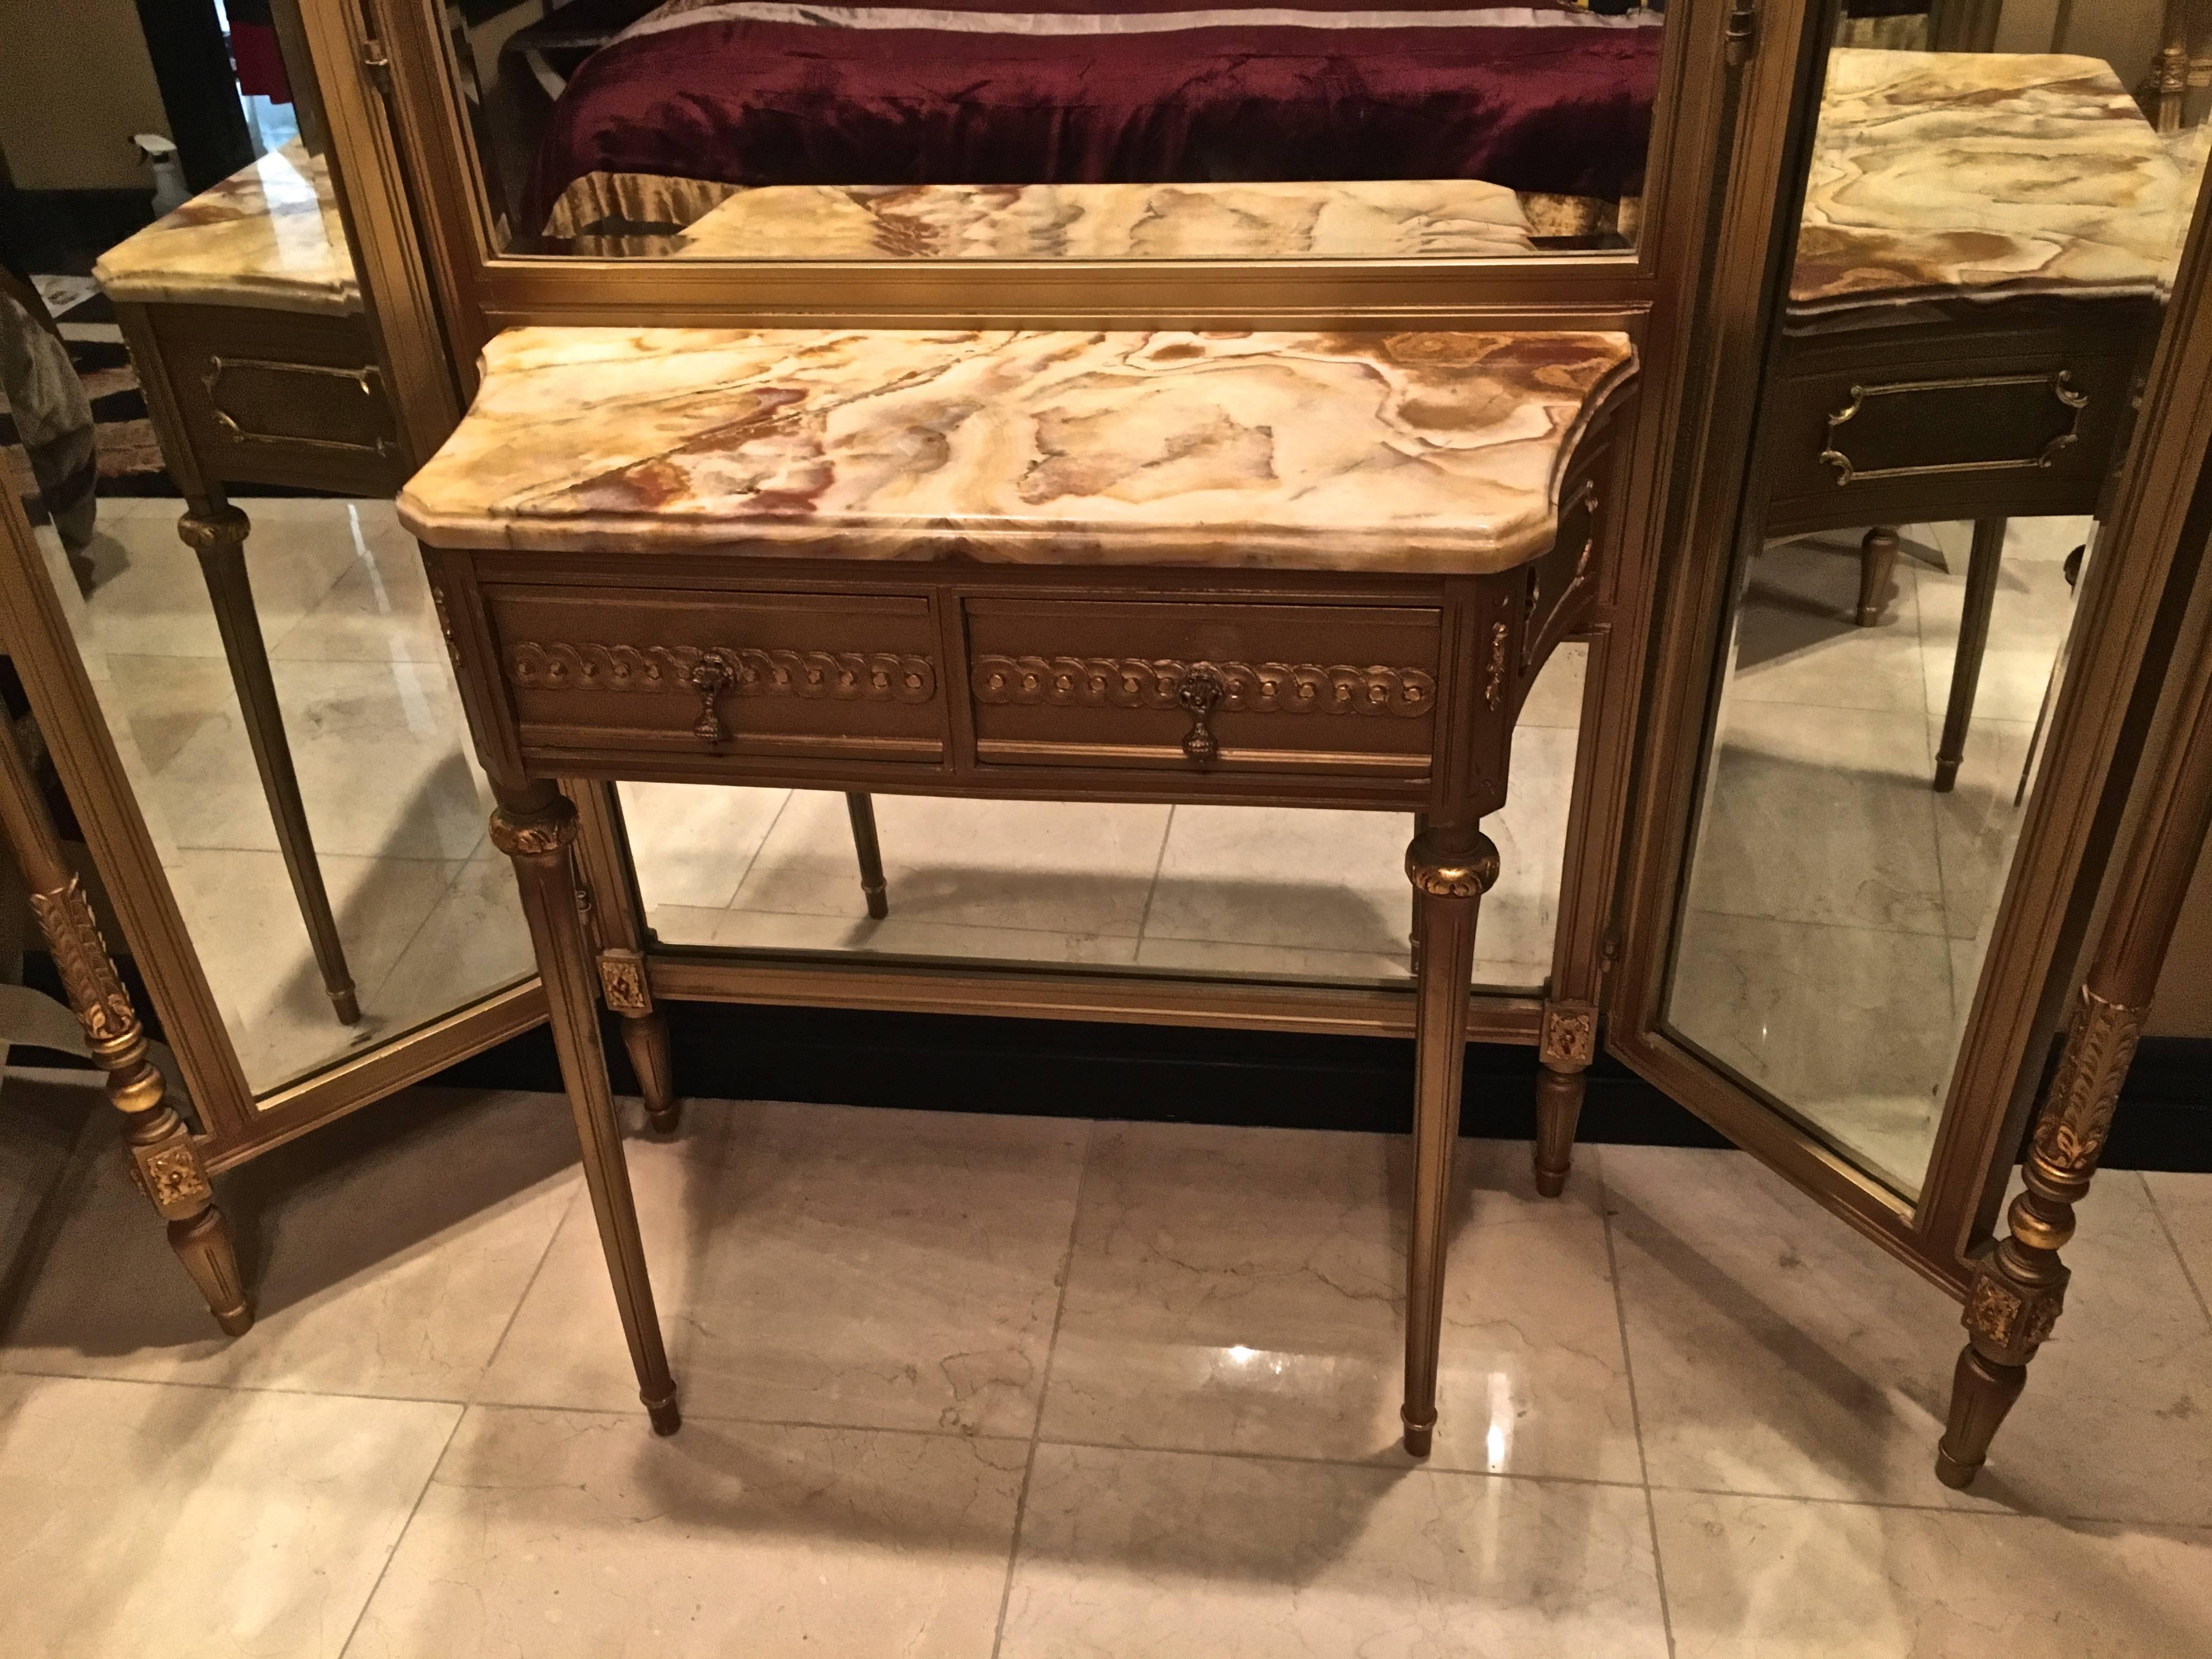 A hand-carved giltwood Louis XVI style tri-fold beveled vanity mirror with dressing table. The dressing table has a beautiful onyx top and two drawers.